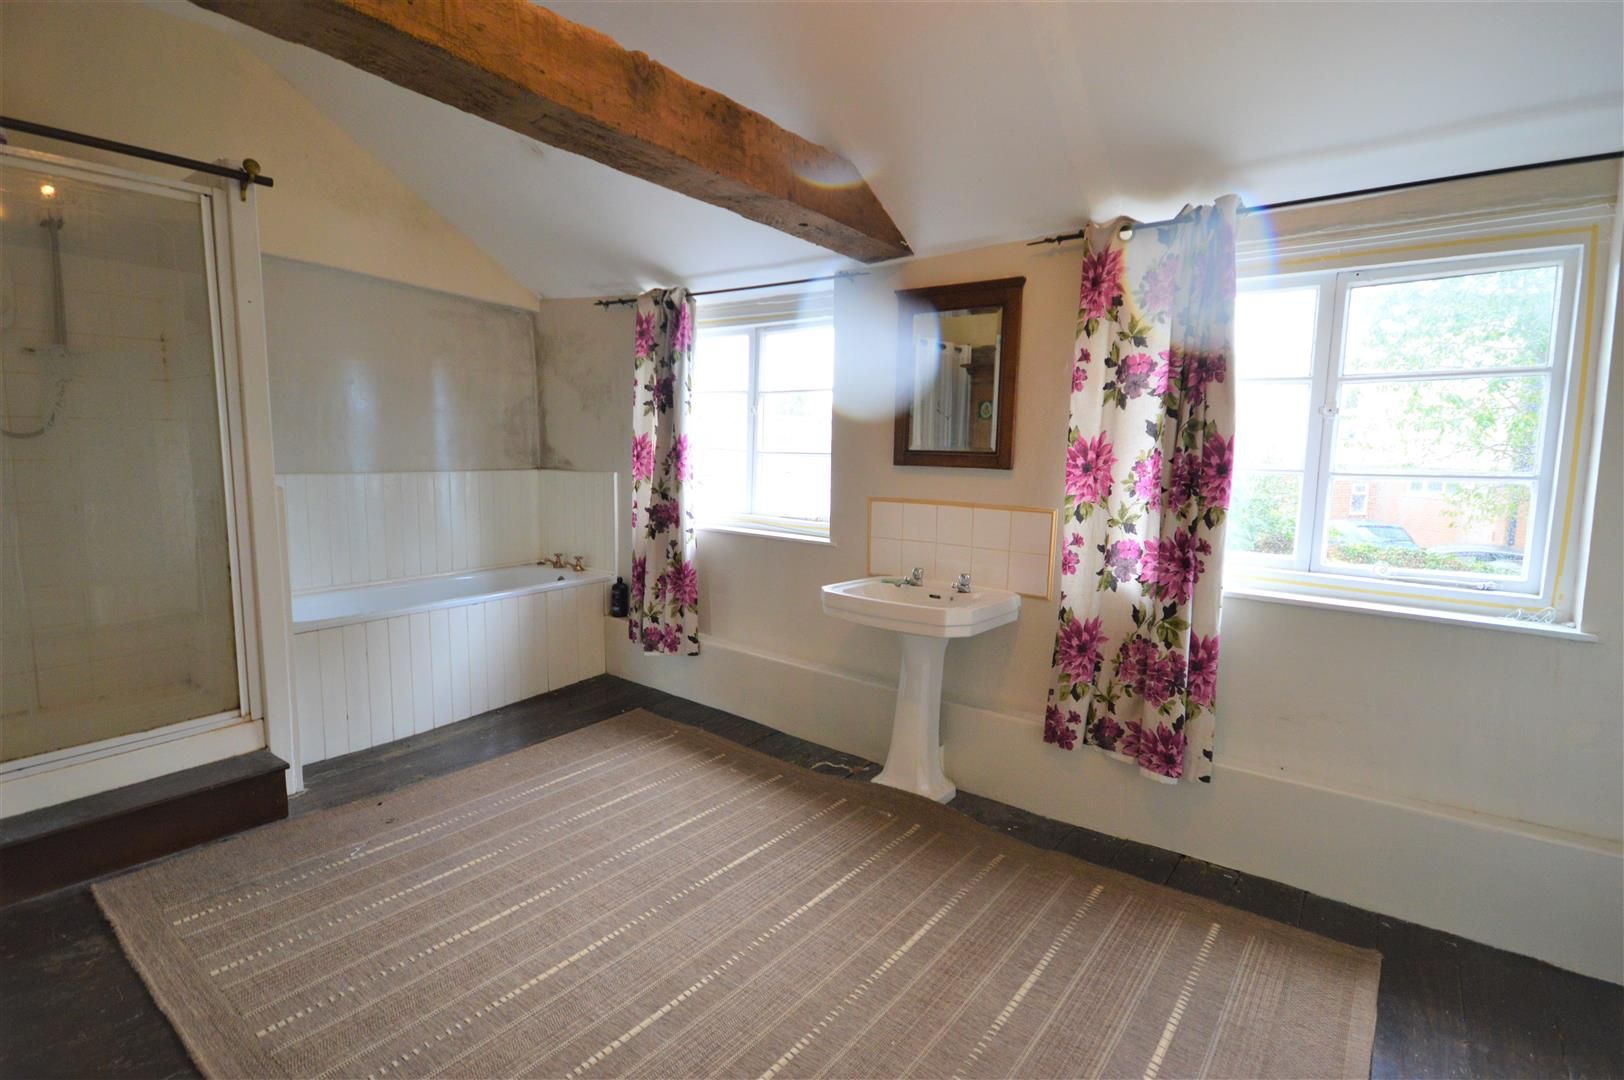 4 bed terraced for sale in Leominster  - Property Image 5